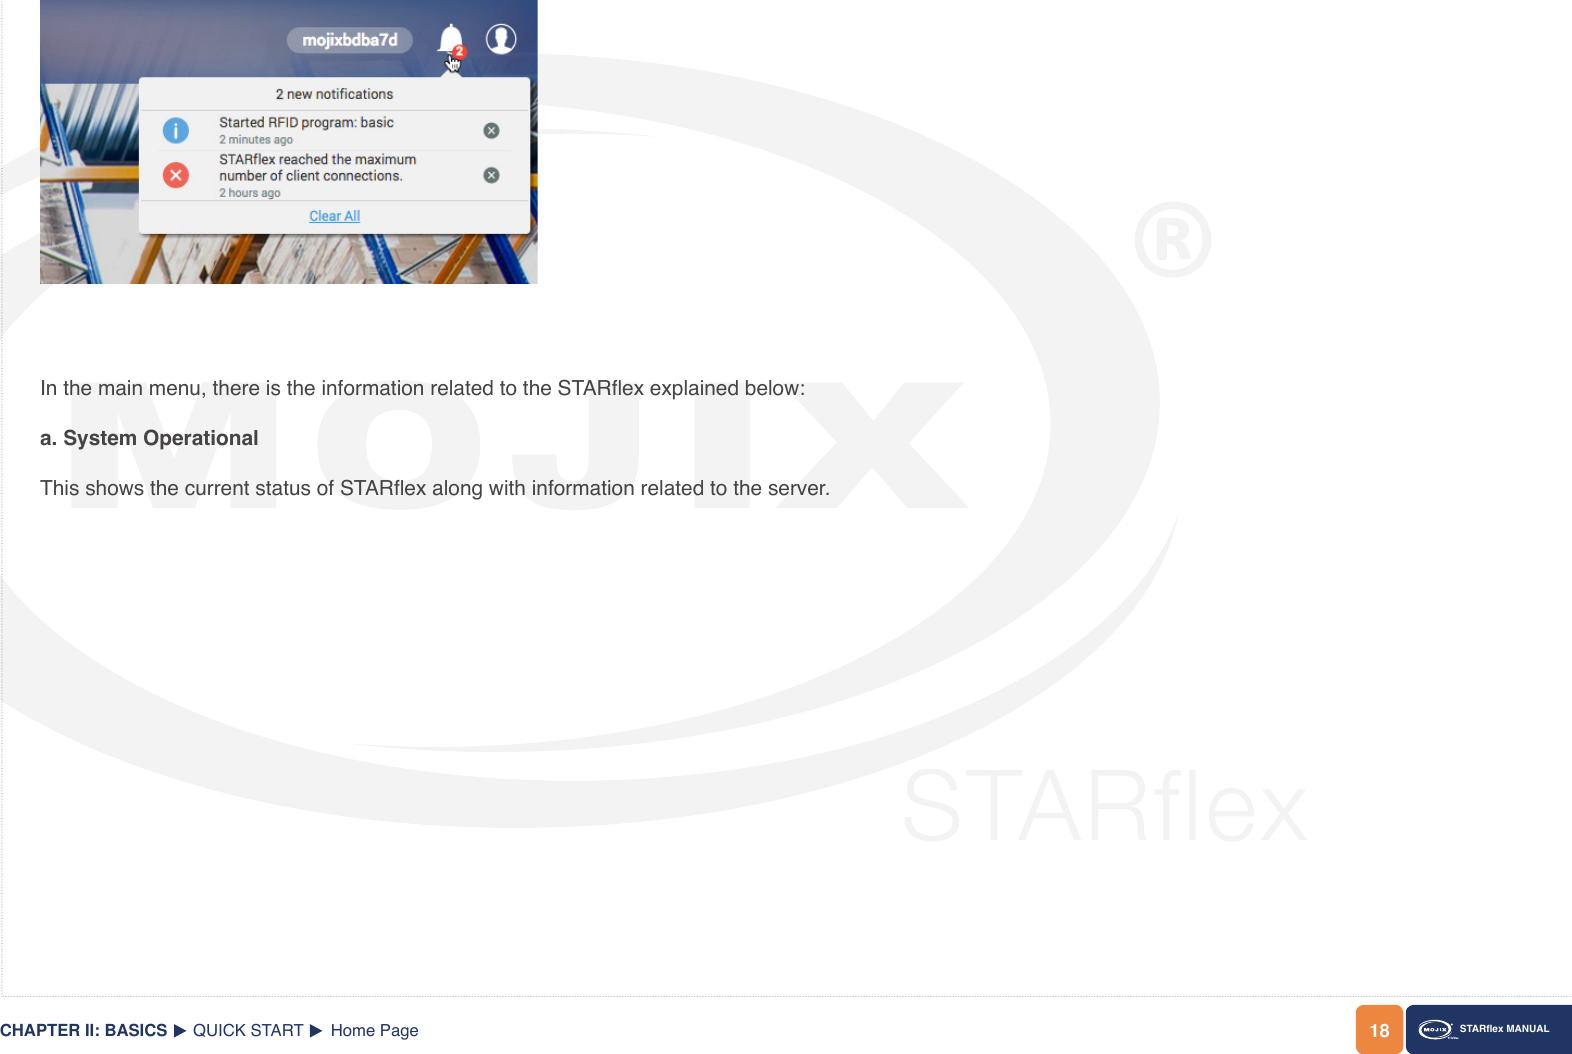 18 STARex MANUALCHAPTER II: BASICS QUICK START Home PageIn the main menu, there is the information related to the STARex explained below: a. System OperationalThis shows the current status of STARex along with information related to the server. 